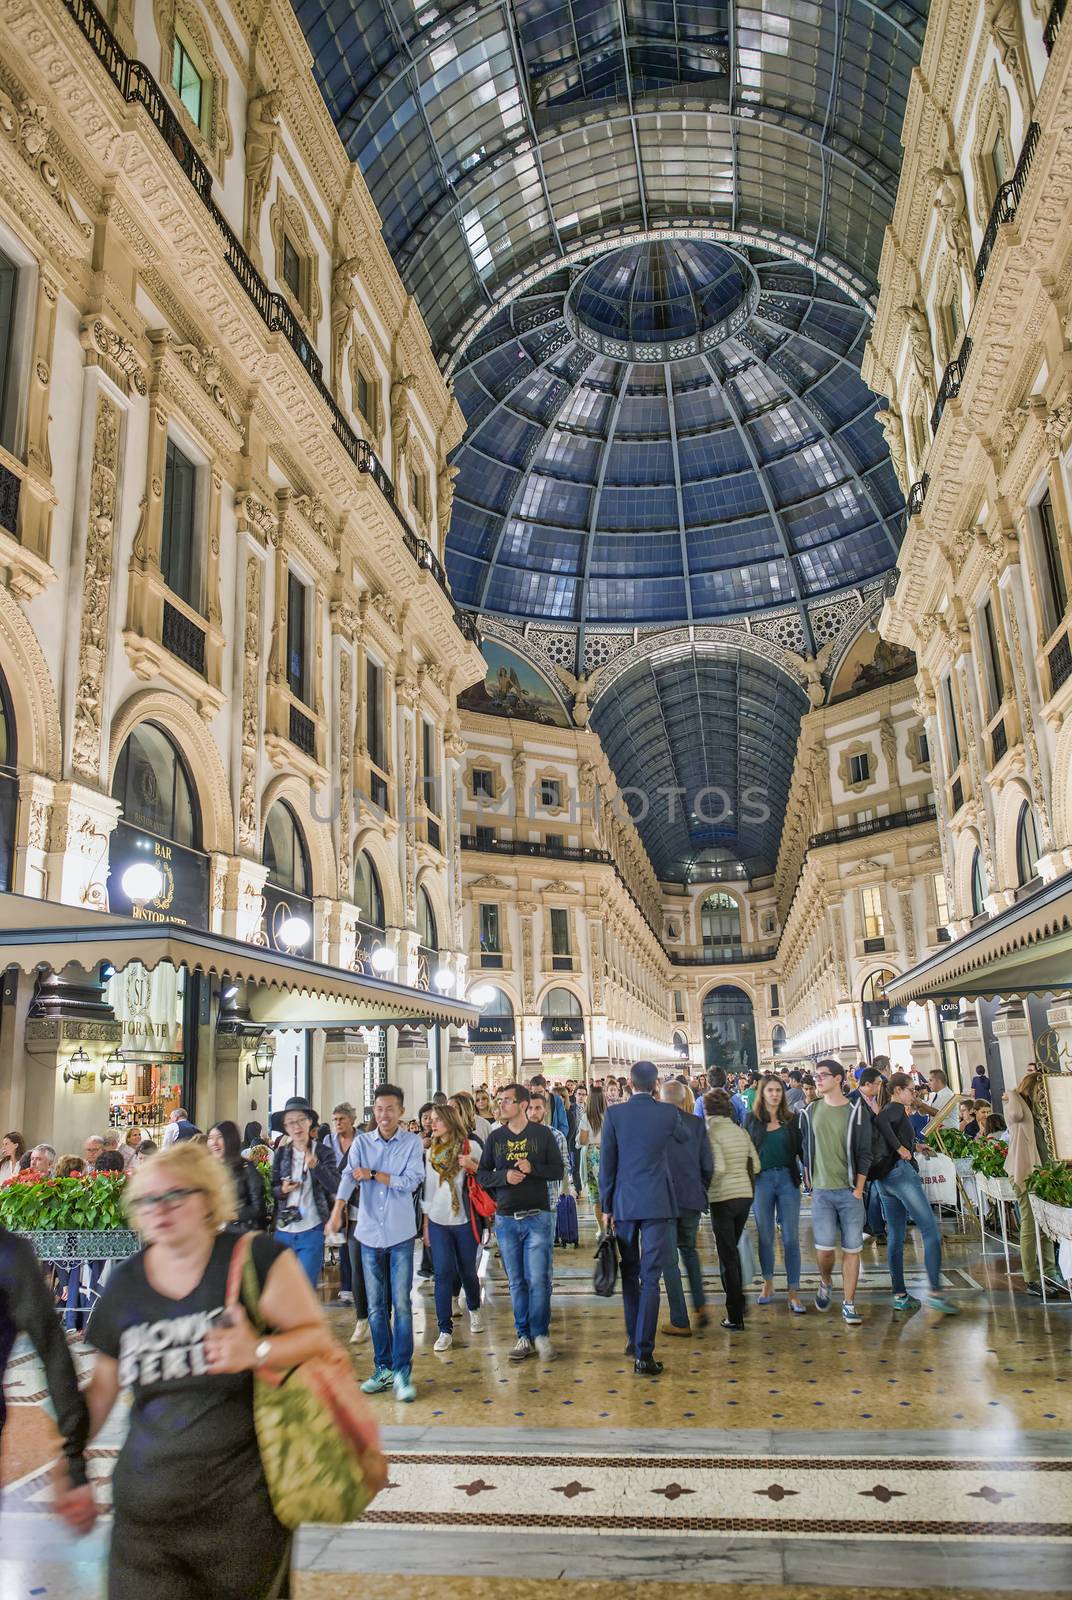 MILANO, ITALY - SEPTEMBER 2015: Galleria Vittorio Emanuele II in Milano. It's one of the world's oldest shopping malls, designed and built by Giuseppe Mengoni.